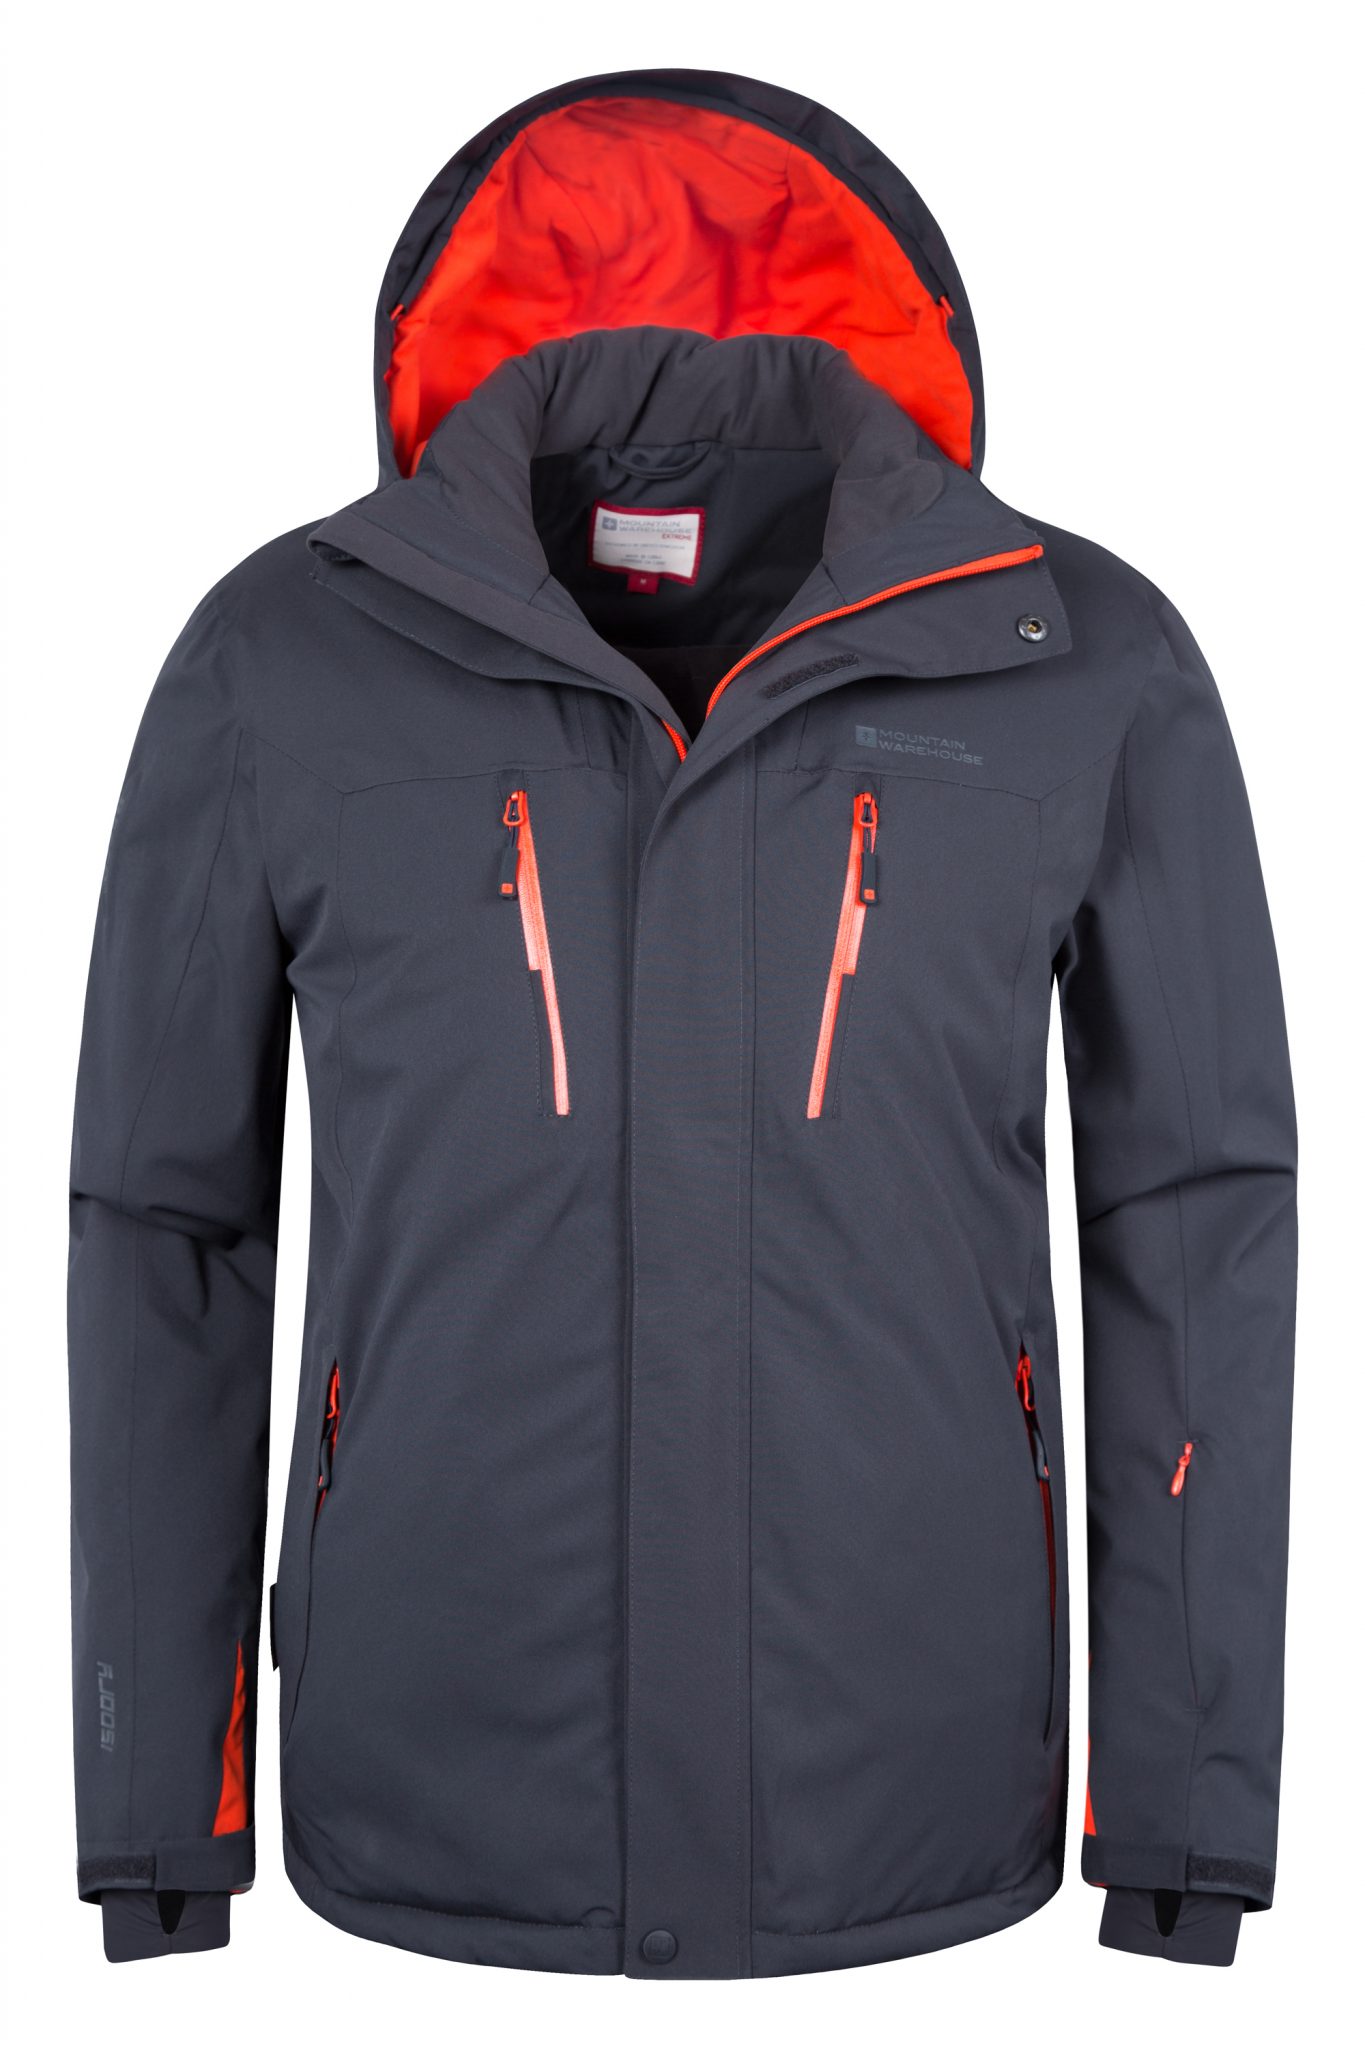 Ski Jacket Features Explained By Mountain Warehouse, 54% OFF